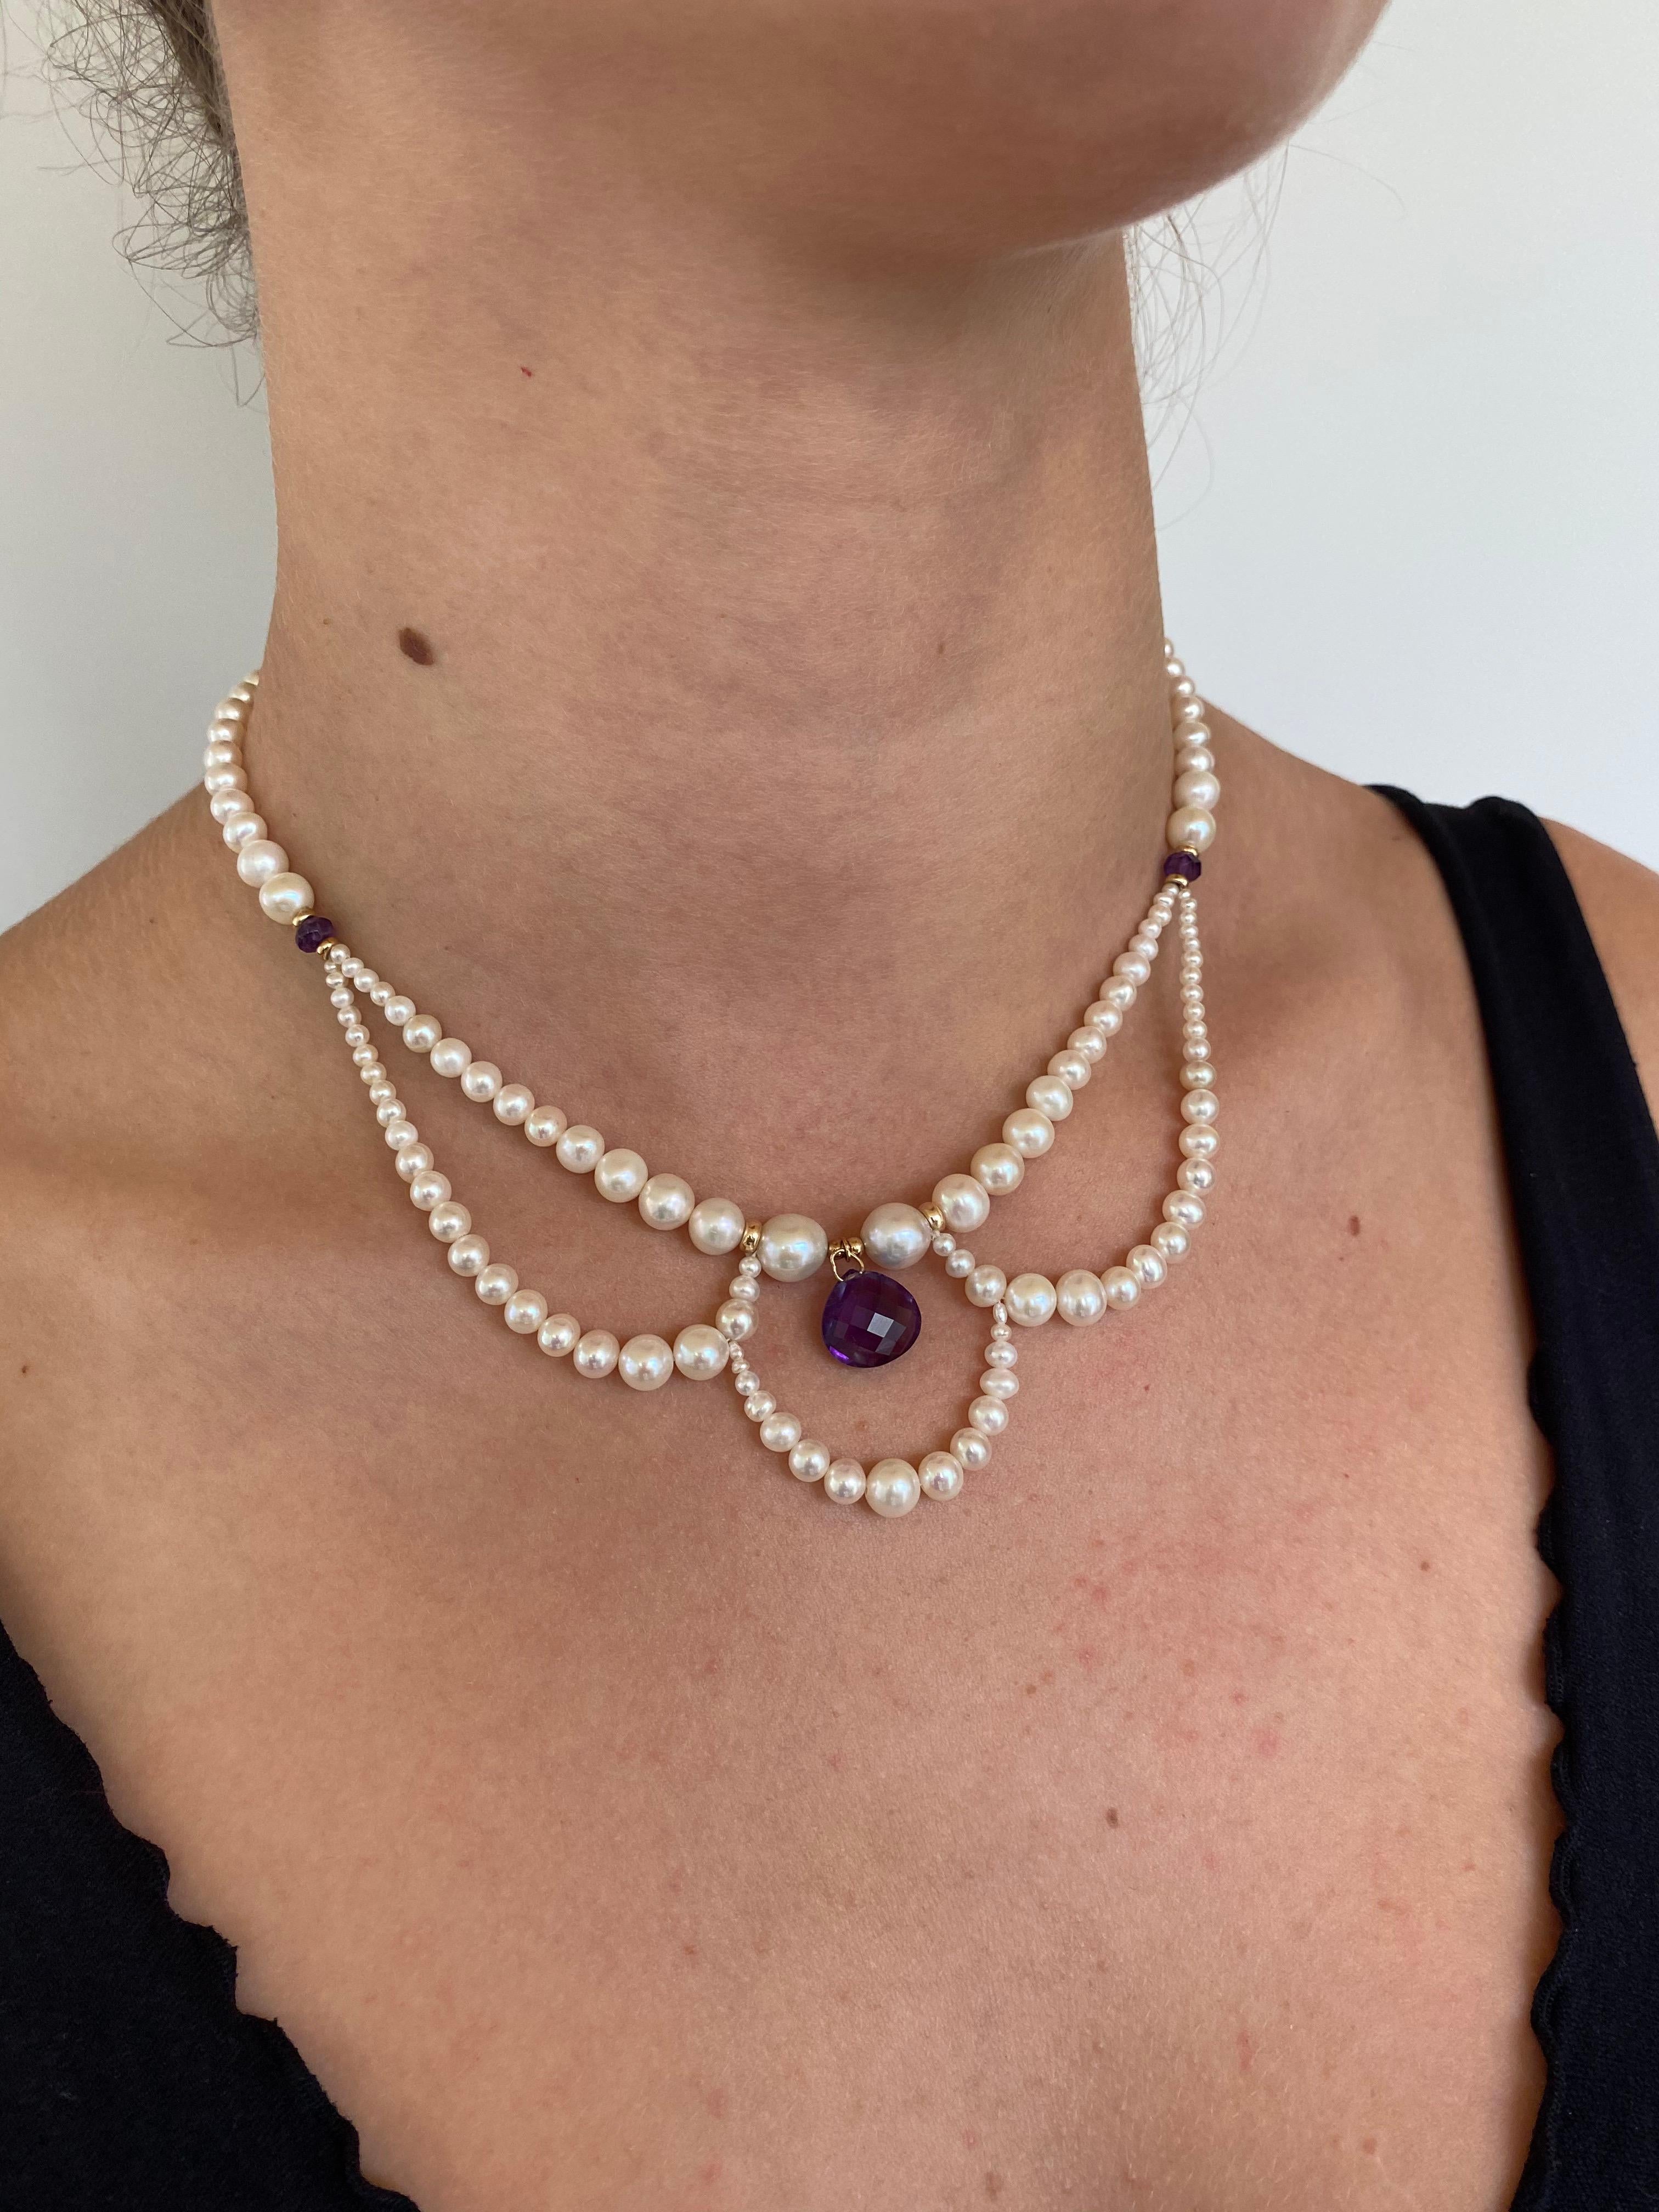 Gorgeous Romantic inspired Lace Necklace featuring a bold Amethyst briolette and 14K Yellow Gold accents. This necklace has high luster cream colored Pearls which graduate in size and drape beautifully, and meet at a beautiful Filigree 14K Yellow